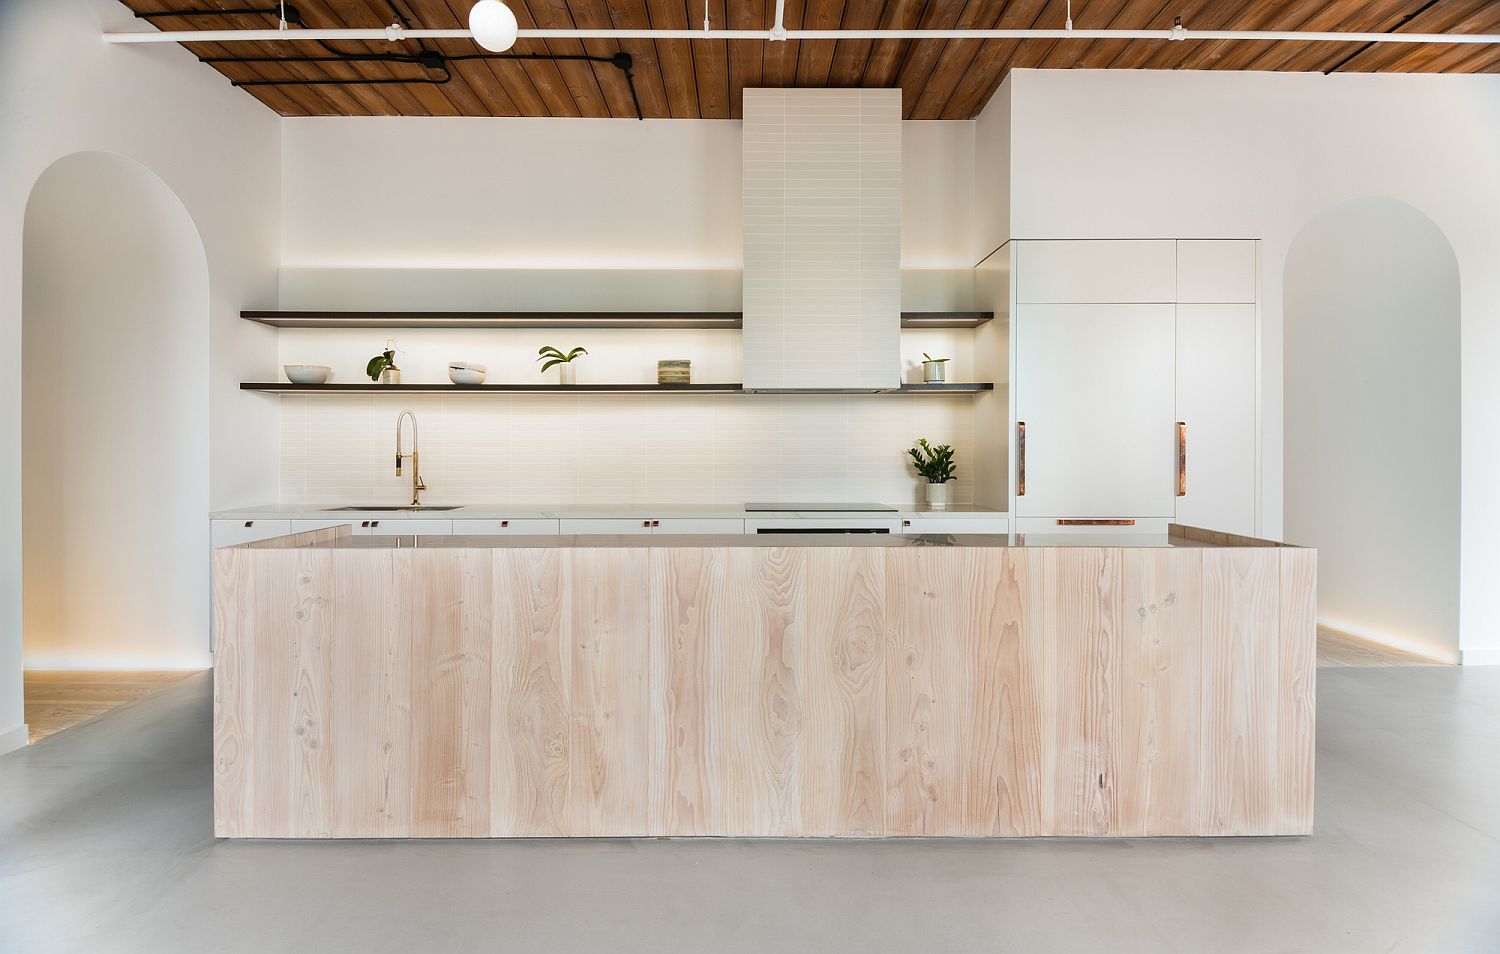 Central island of the spacious white kitchen clad in douglas fir